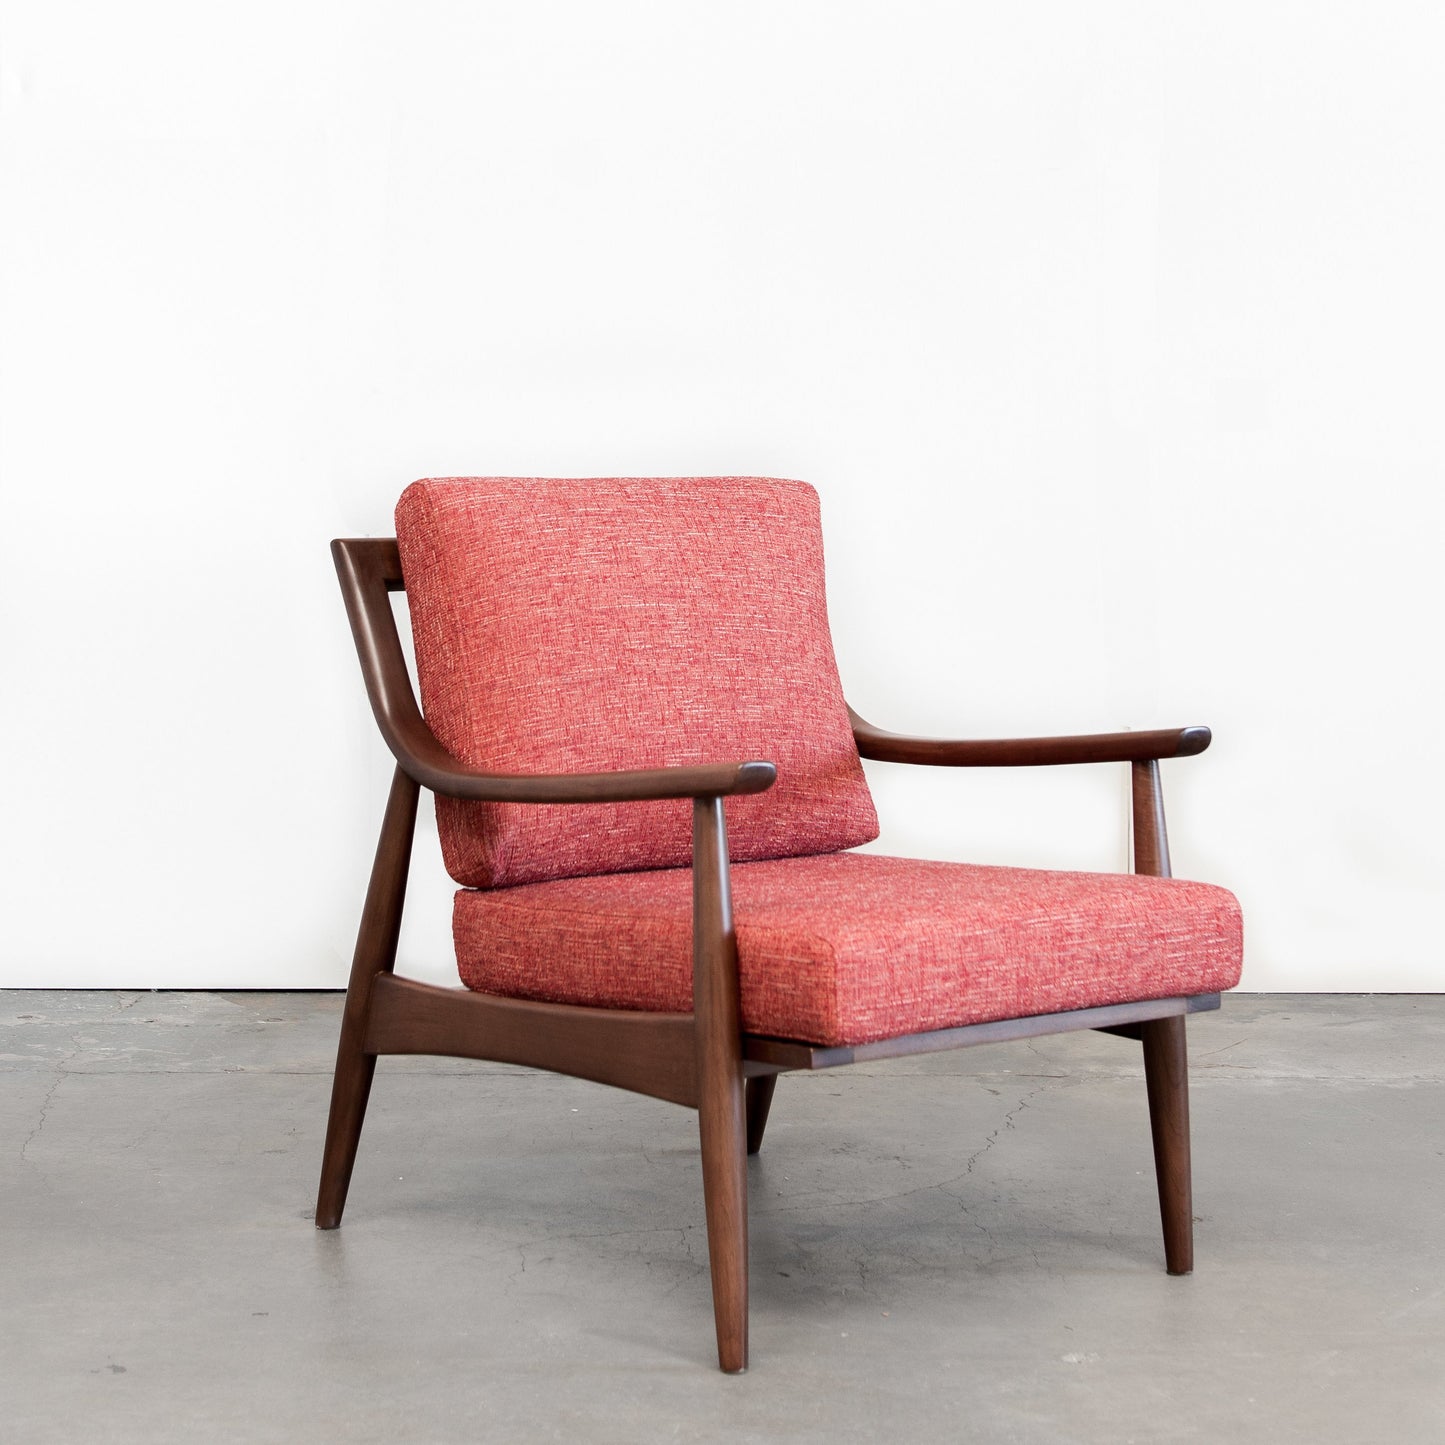 Load image into Gallery viewer, Adam Chair, Medium Walnut Picante Gingko Home Furnishings  Picante   Four Hands, Burke Decor, Mid Century Modern Furniture, Old Bones Furniture Company, Old Bones Co, Modern Mid Century, Designer Furniture, https://www.oldbonesco.com/
